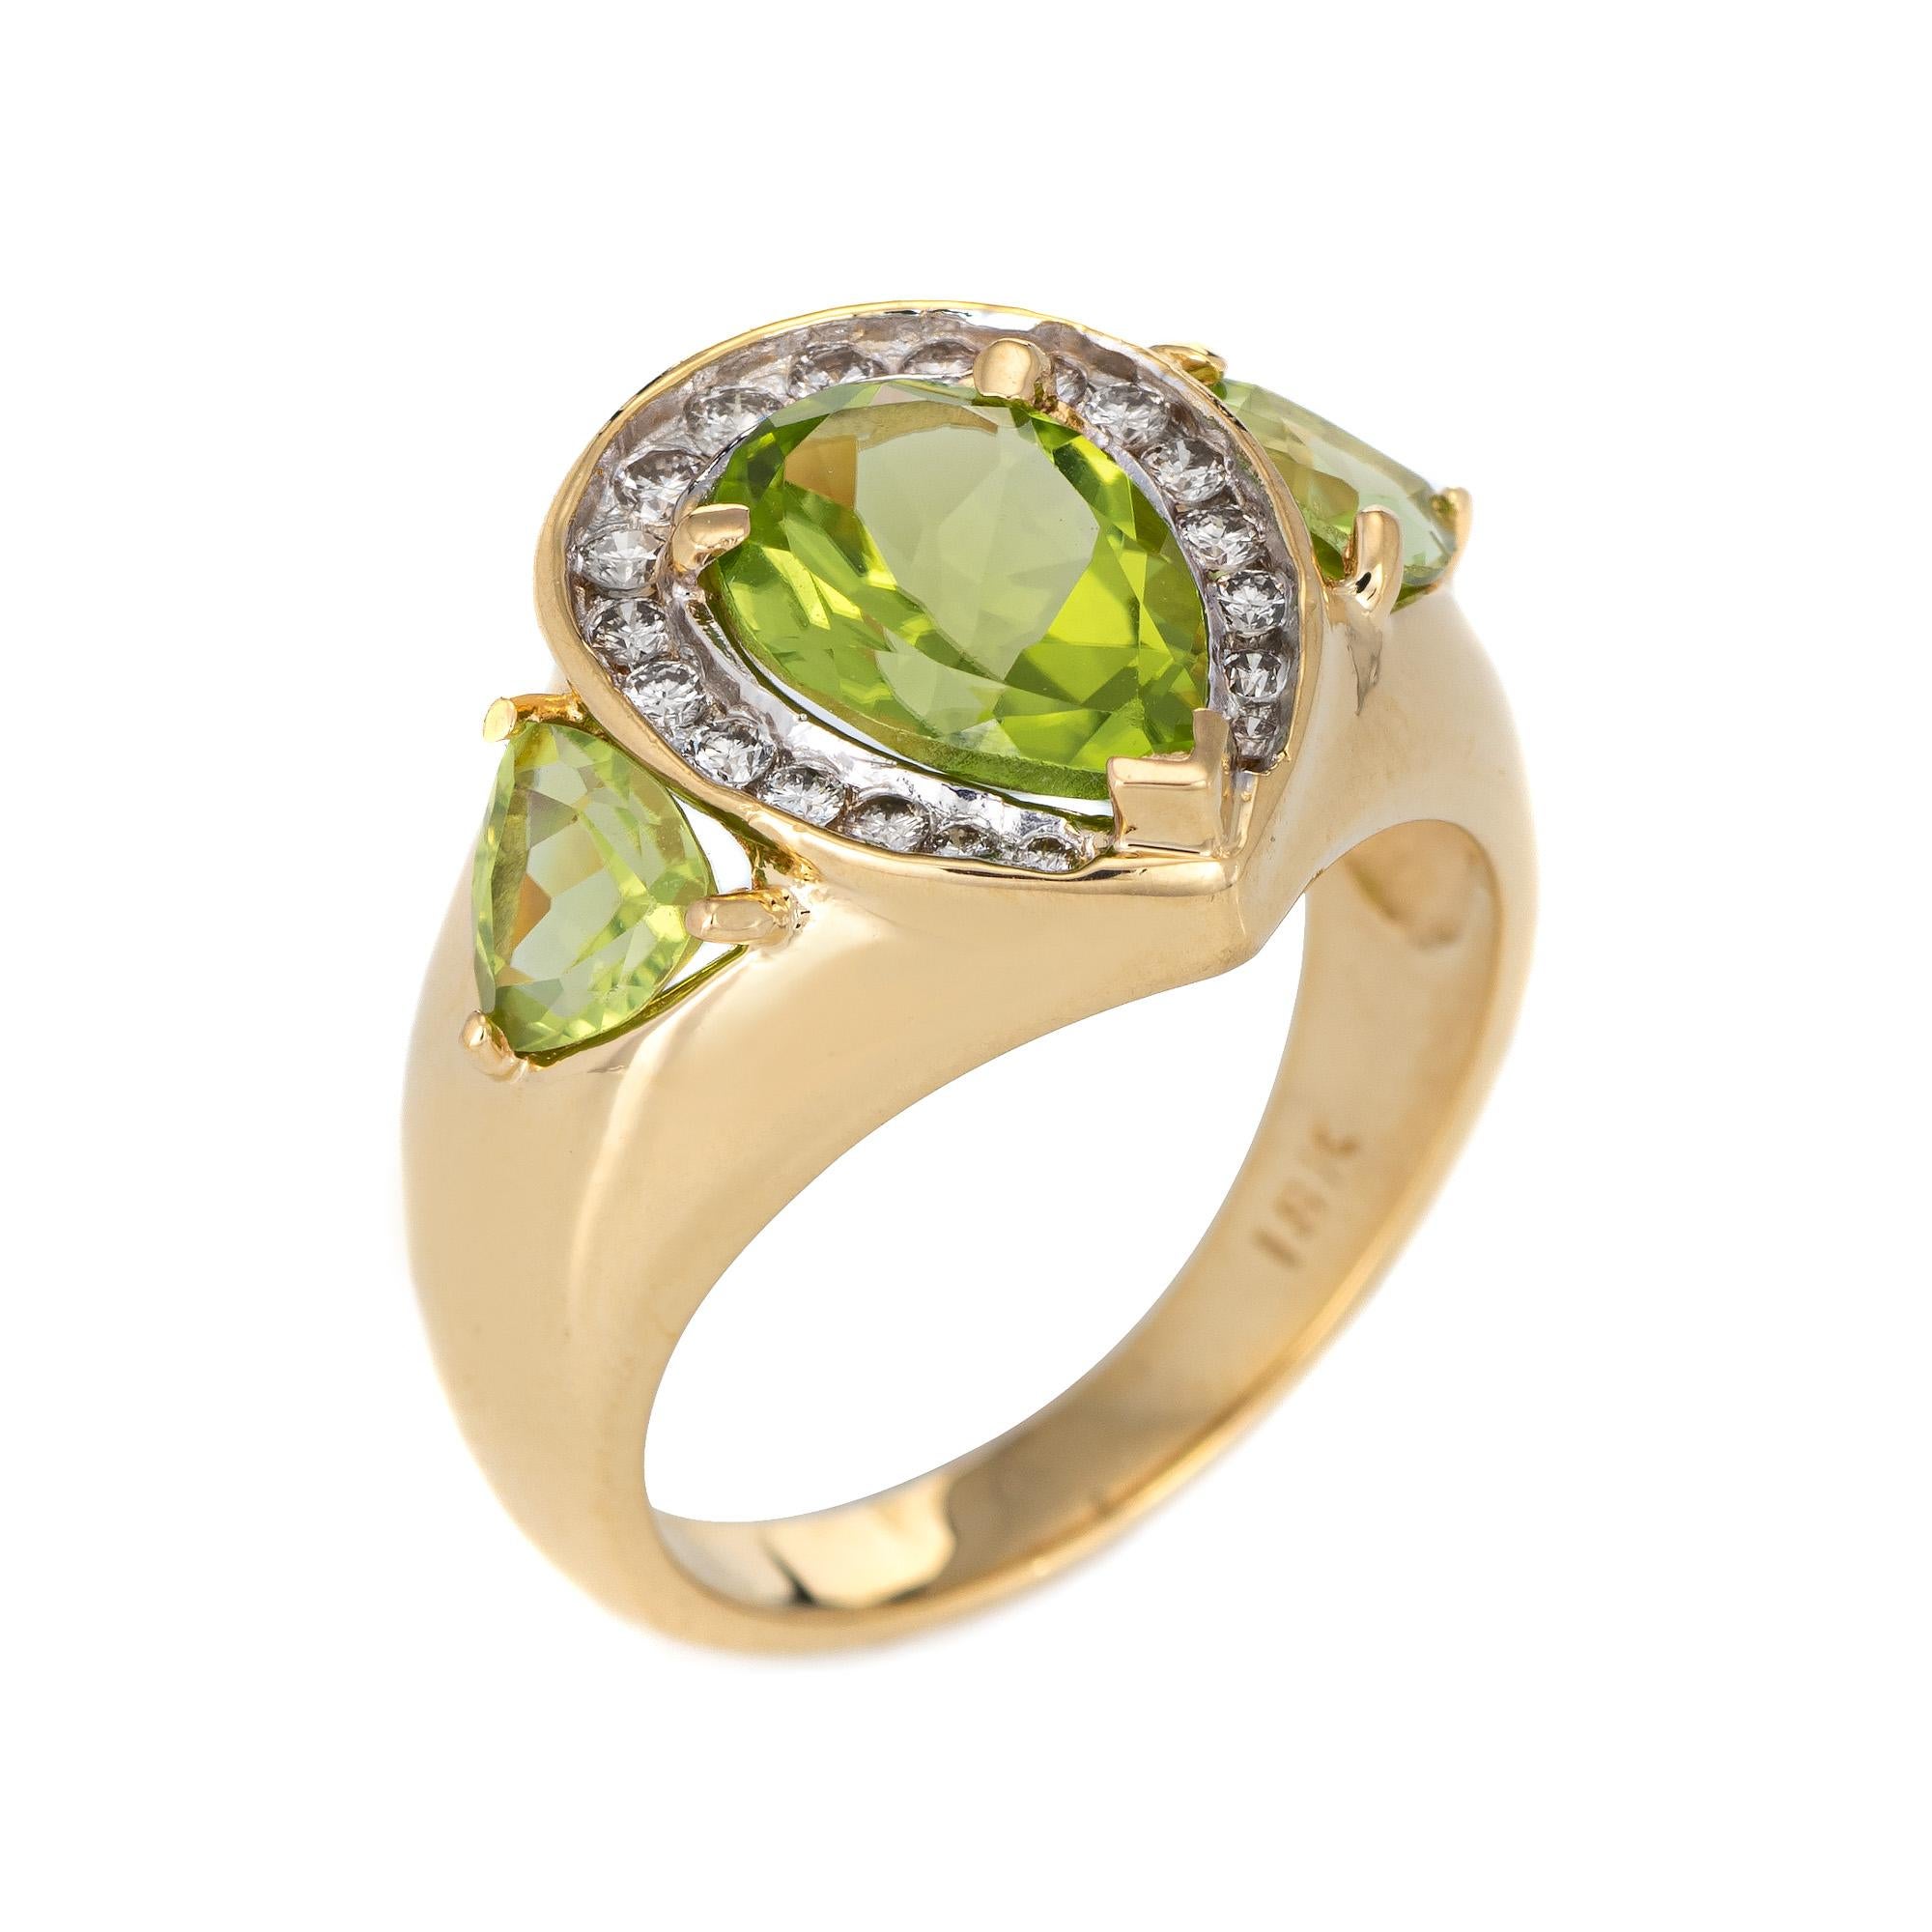 Stylish vintage peridot & diamond (circa 1980s to 1990s) crafted in 18 karat yellow gold. 

Faceted pear cut peridot measures 10mm x 7mm, accented with a further two pieces of peridot (side shoulders) measuring 5mm x 2mm. The total peridot weight is